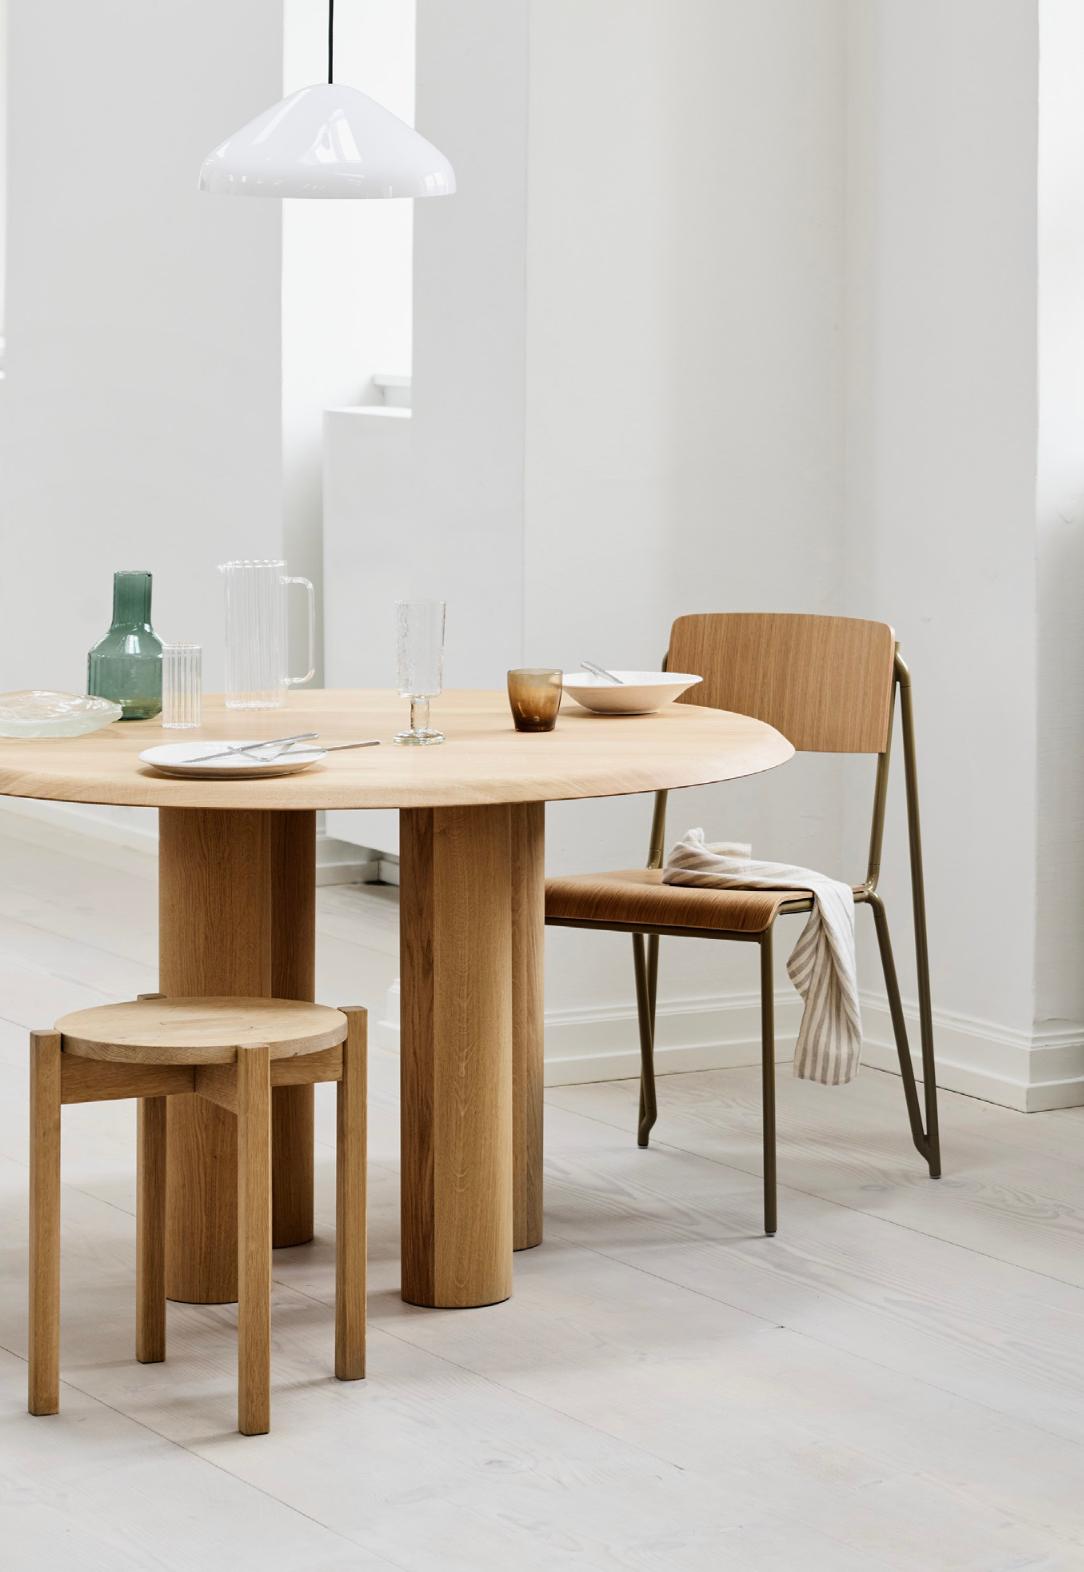 A simple Stool or Side Table, the Norian is a versatile addition to any space. There are countless uses for this minimal, yet robust stool, which make it the perfect addition to your home or commercial space. The simple silhouette is enriched with